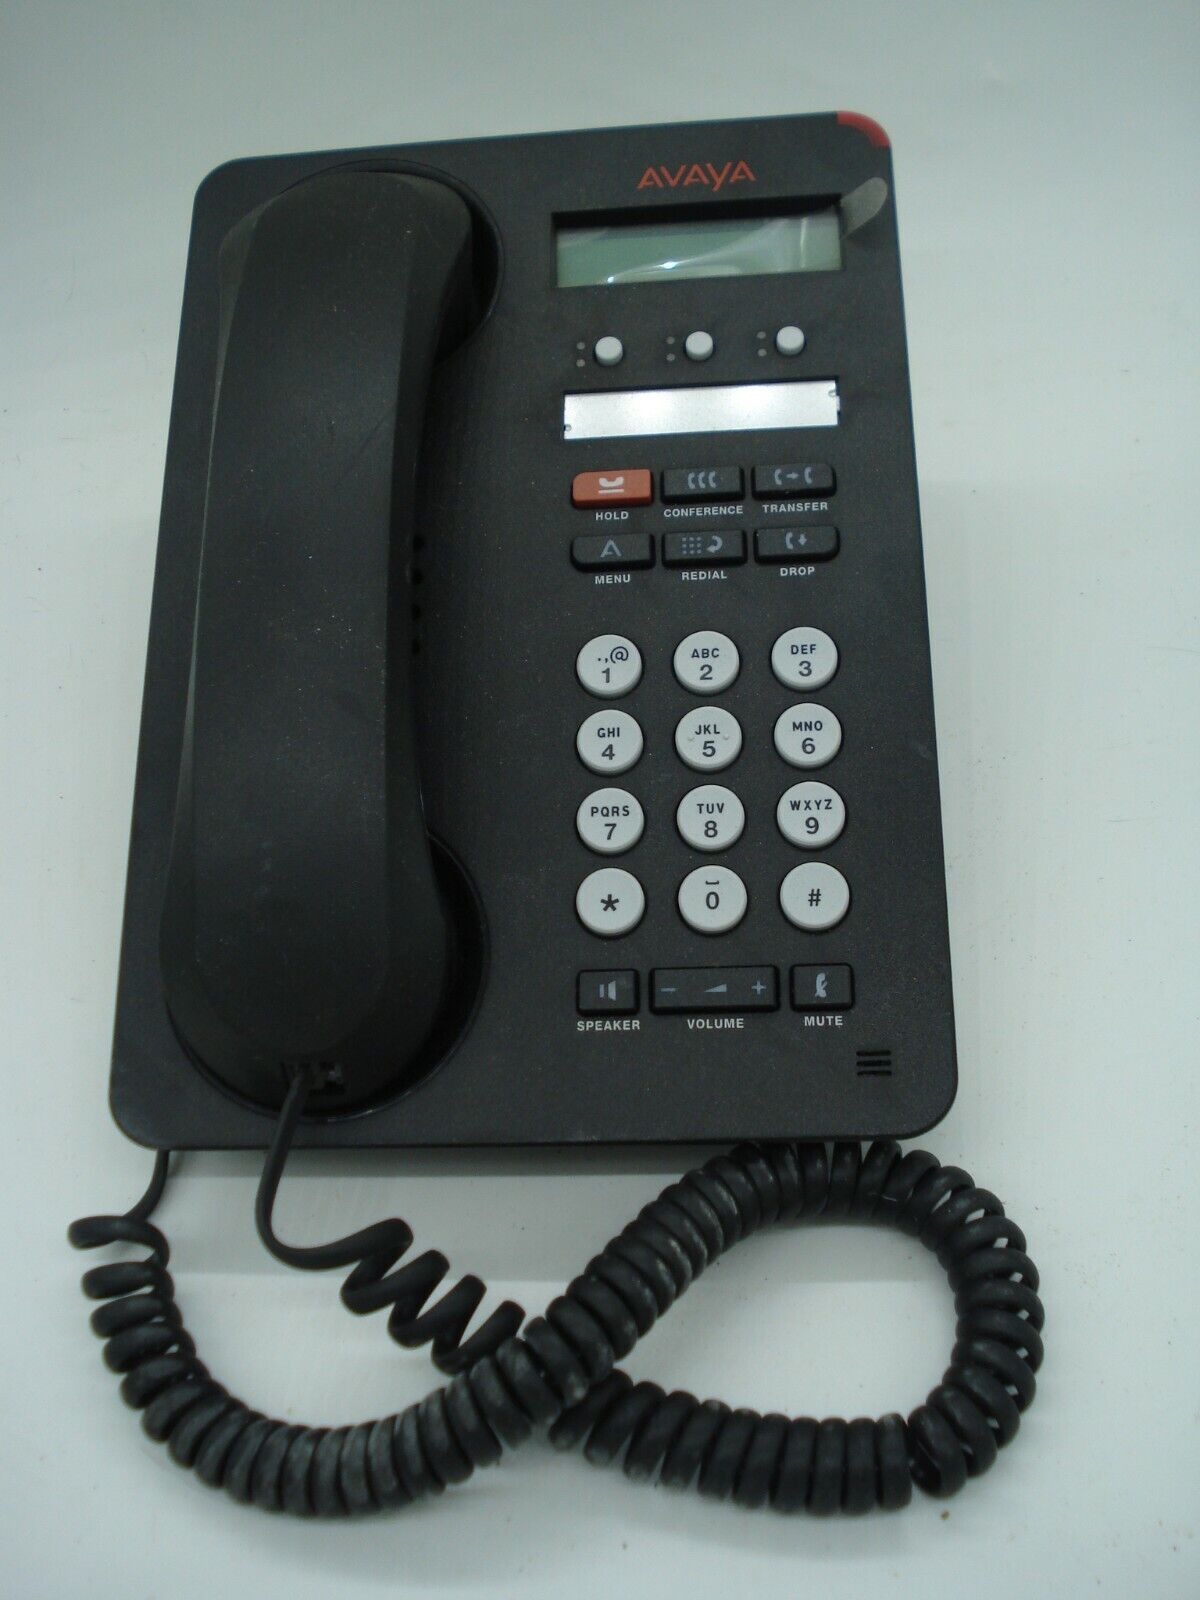 Avaya Model 1603 Business Office IP Phone Black w/ Stand and Handset